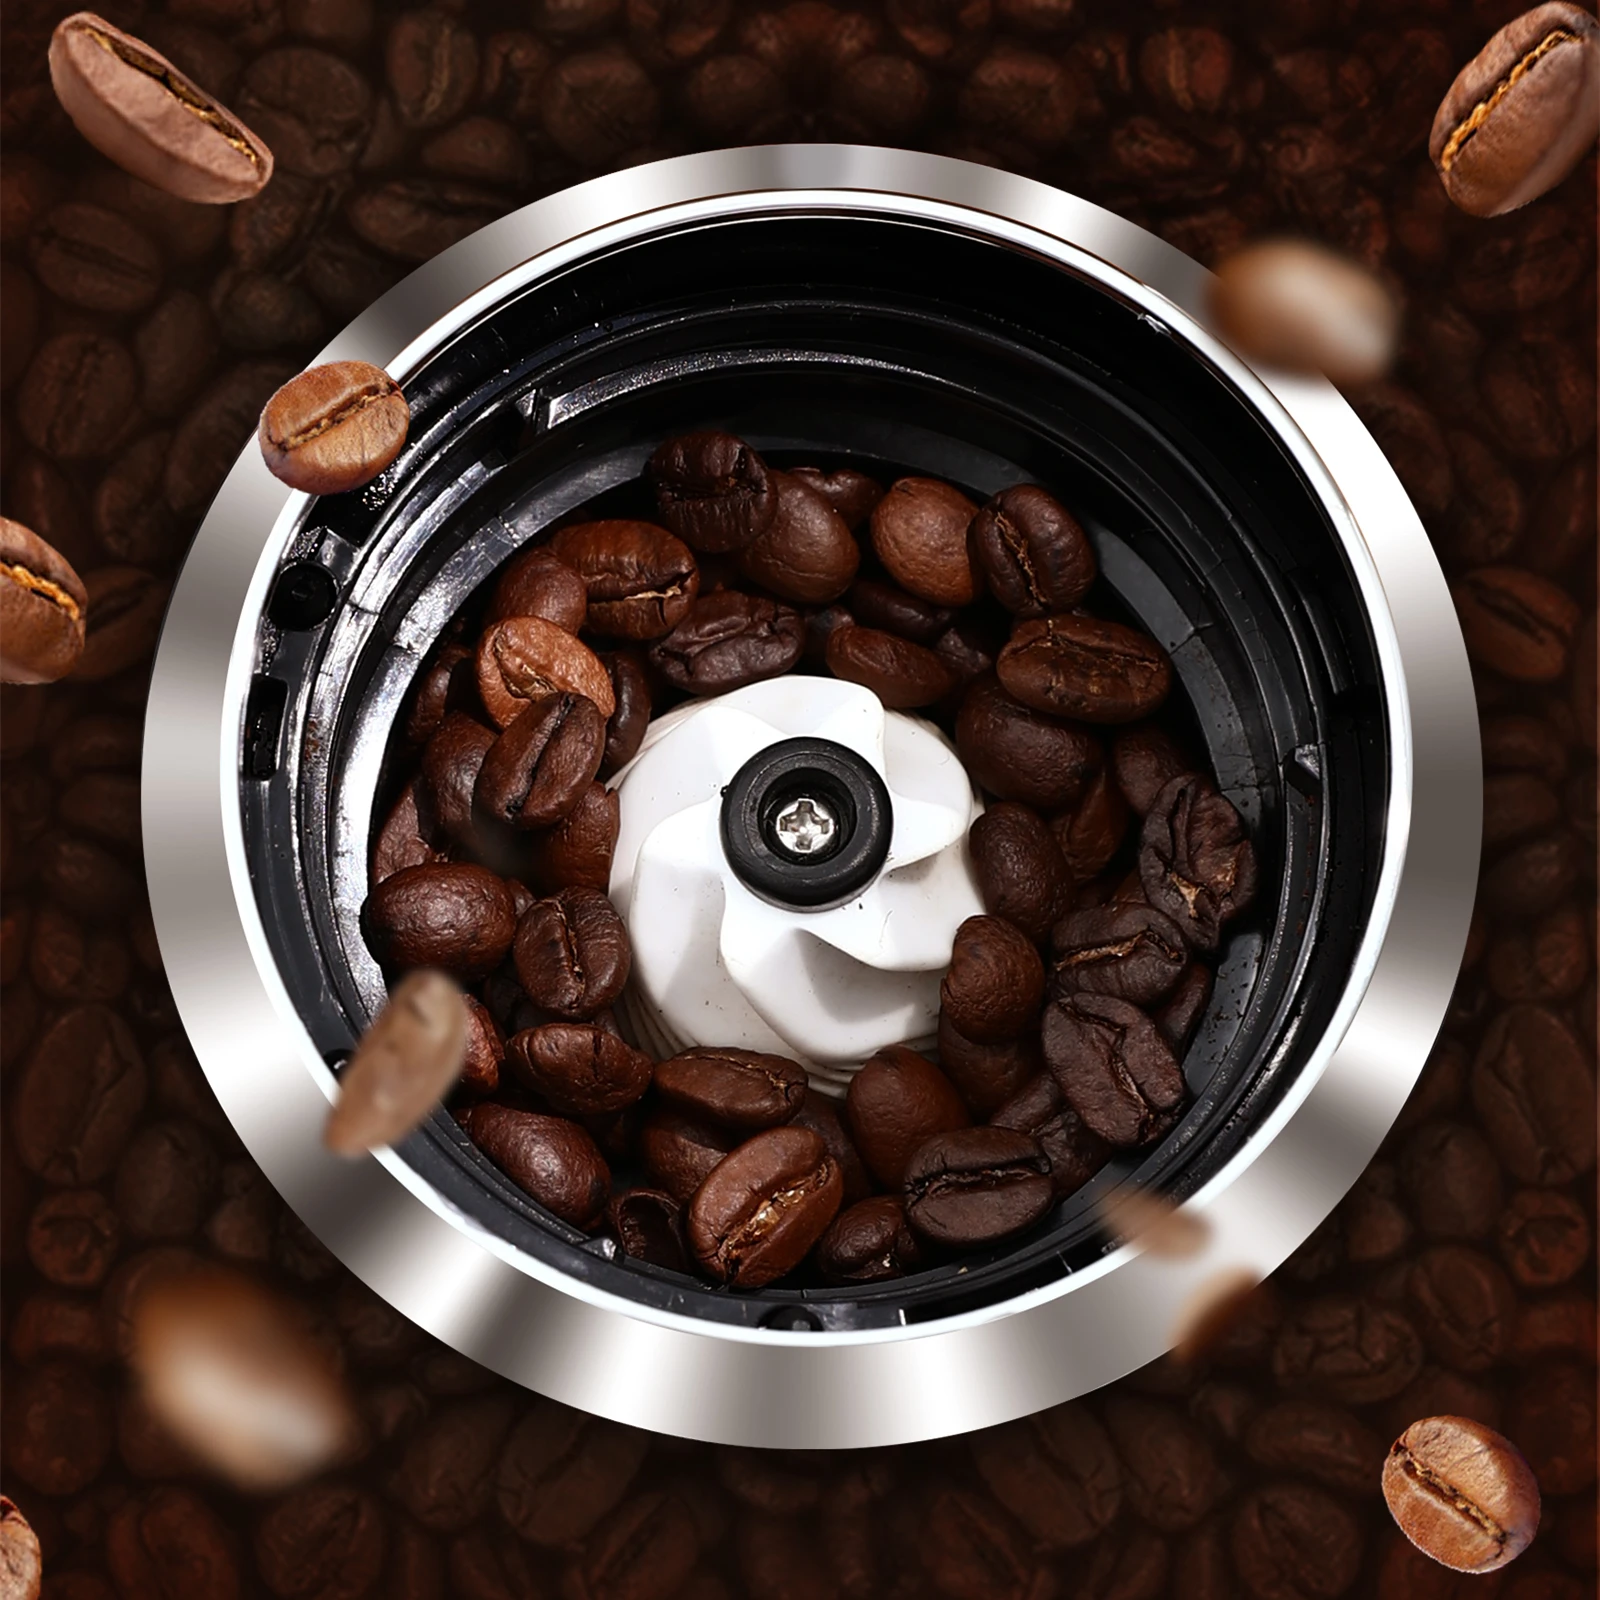 Sloby Original Brand Professional 15 Grind Settings Conical Burr Coffee Grinder Grinds For Espresso to Coarse For French Press enlarge